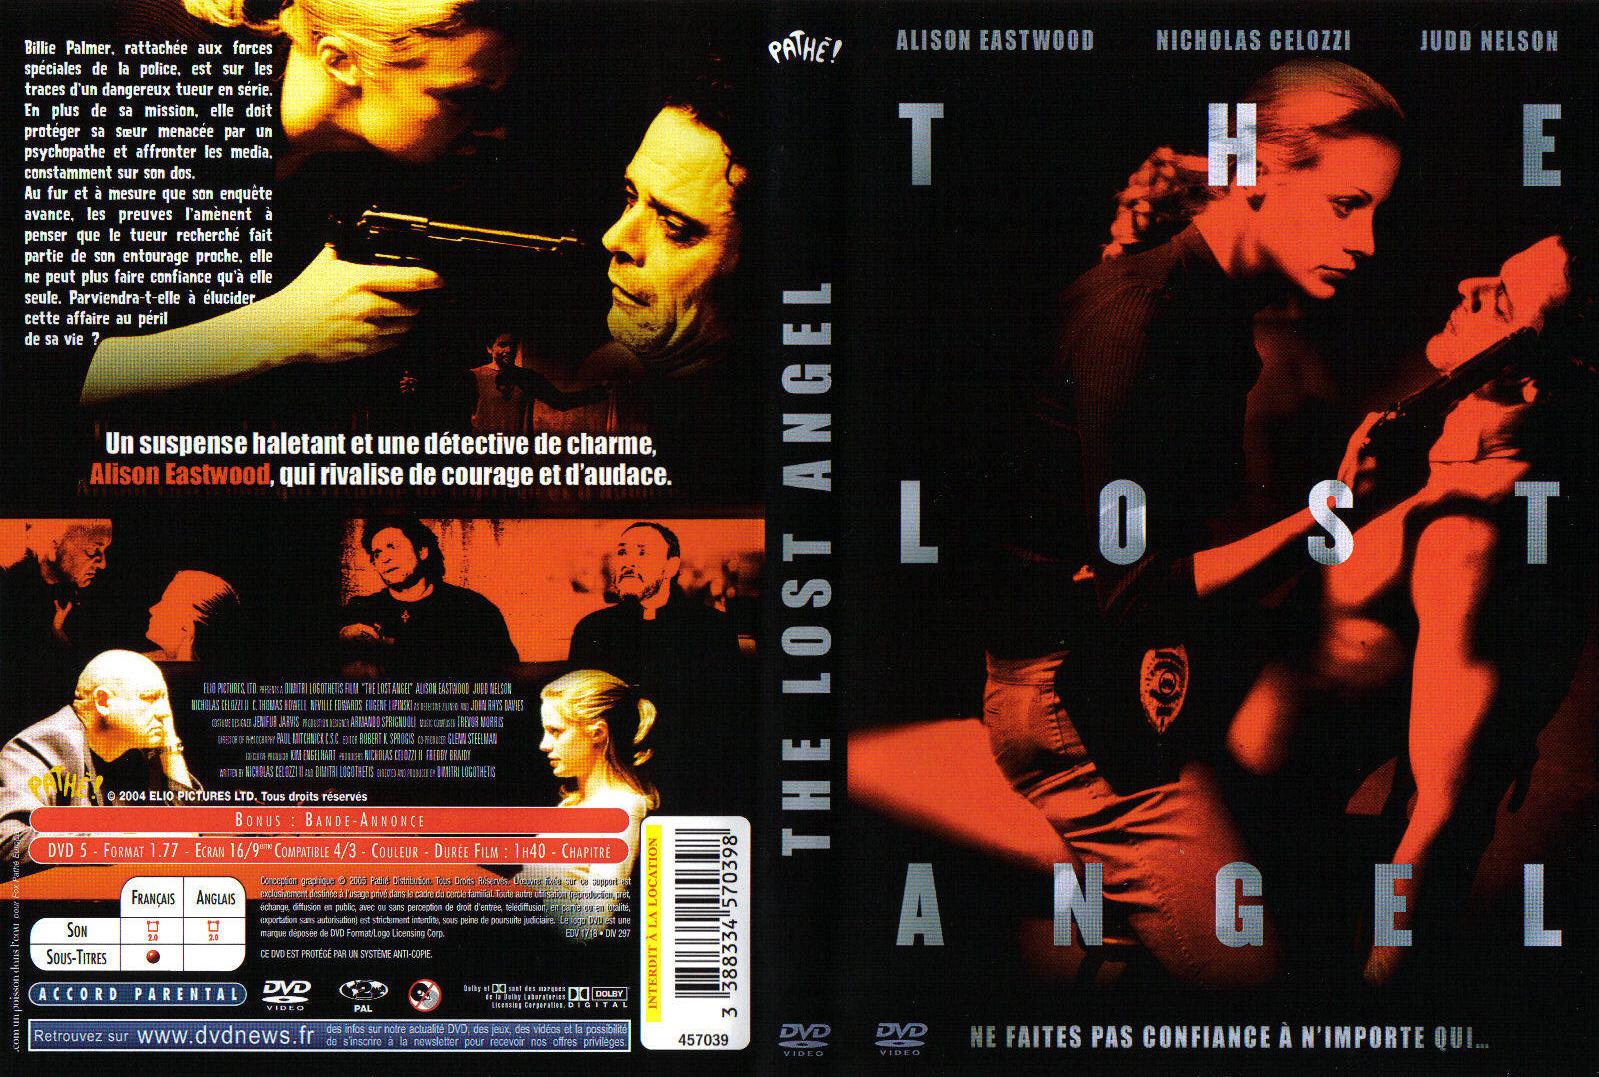 Jaquette DVD The lost angel